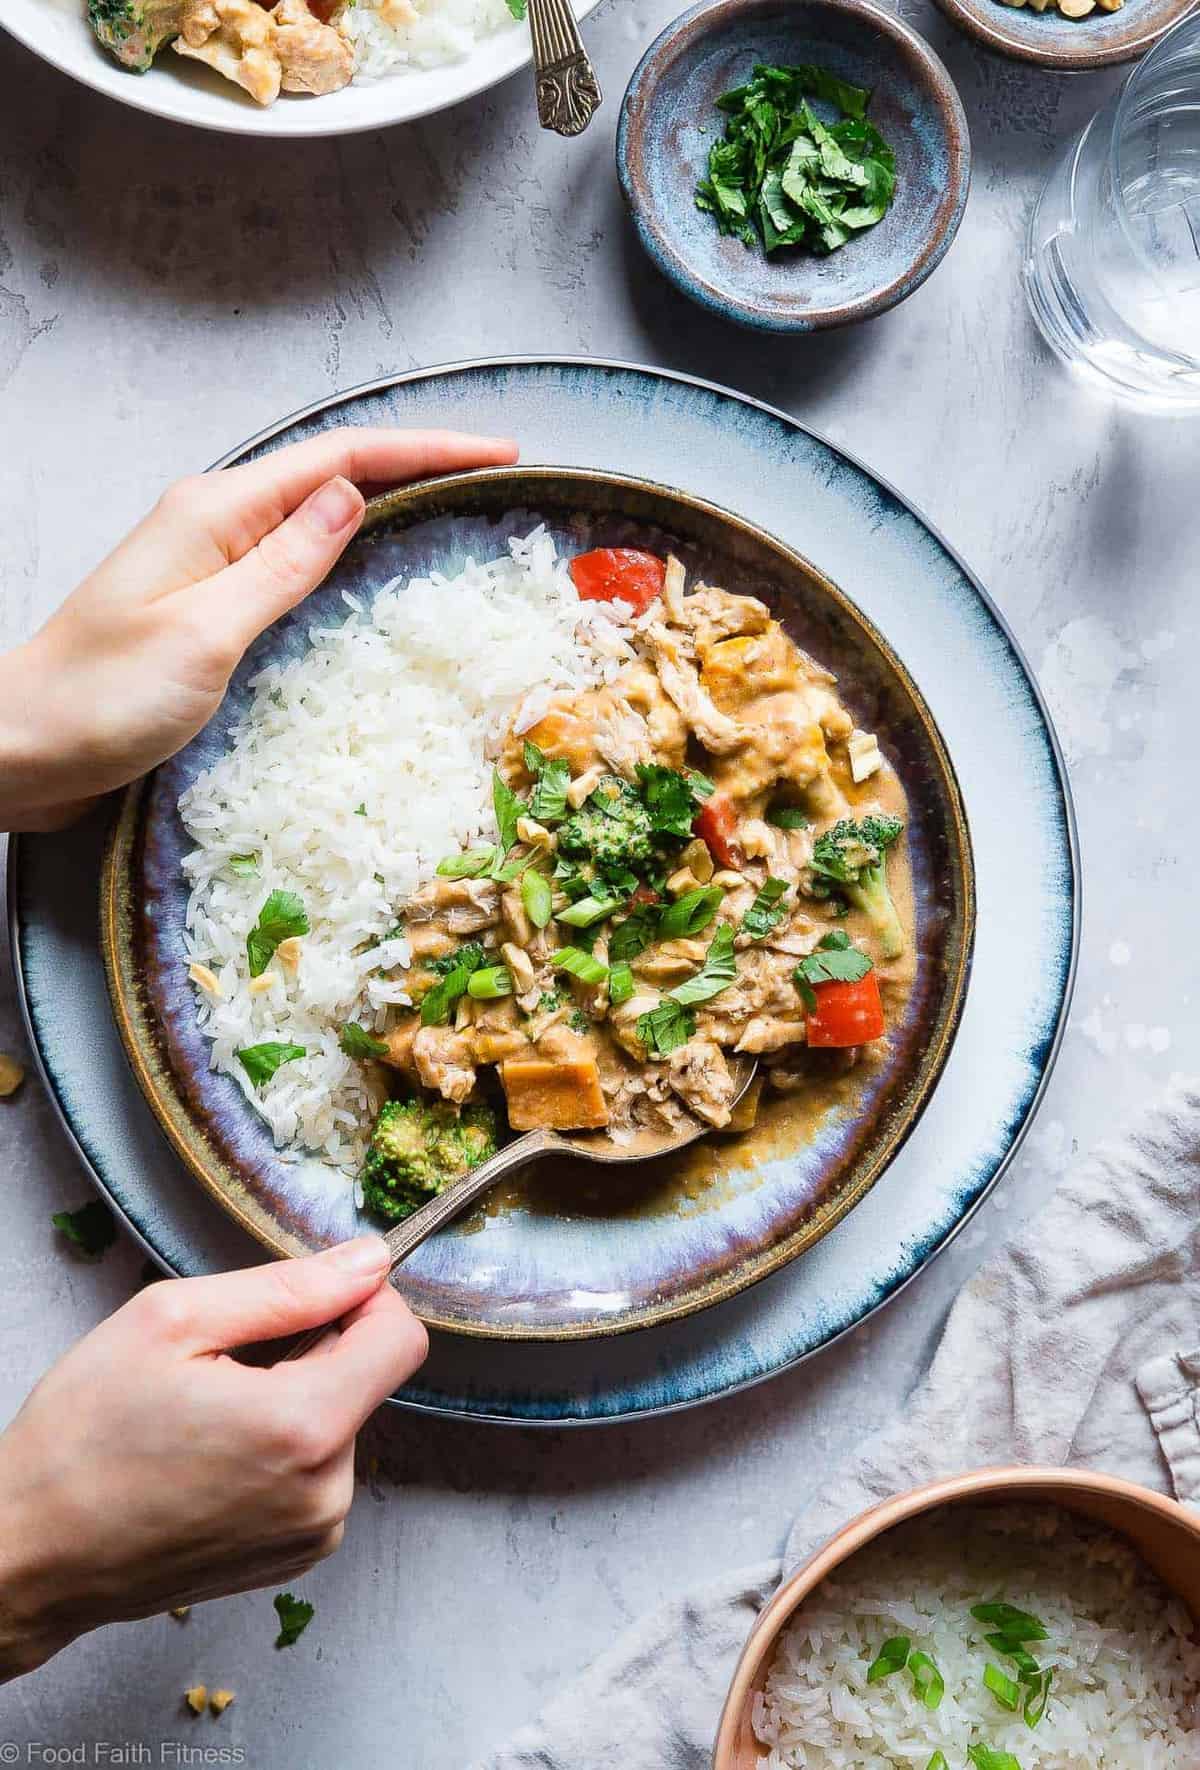 Easy Crockpot Thai Peanut Butter Chicken Curry - The slow cooker does all the work for you in this EASY, weeknight family-friendly dinner that is gluten and dairy free and packed protein. Great for meal prep too! | #Foodfaithfitness | #Glutenfree #Dairyfree #Slowcooker #Crockpot #Healthy 